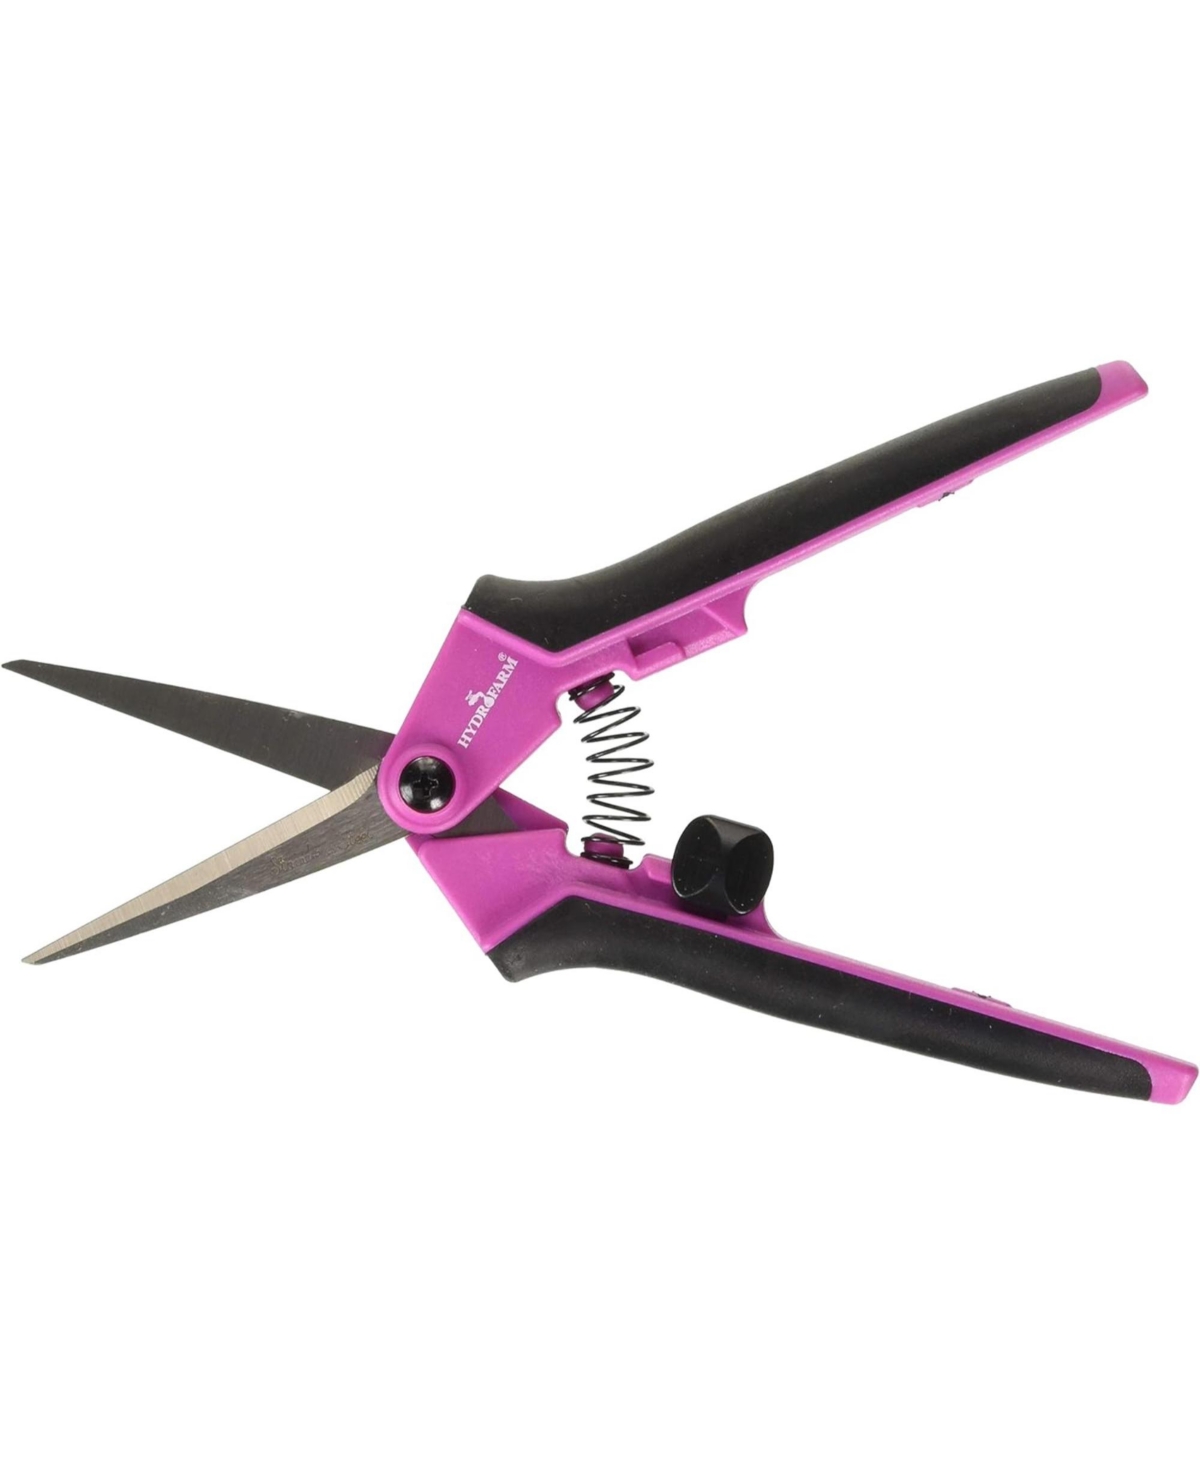 Hydro farm Precision Pruner, Pink, Small - Pink